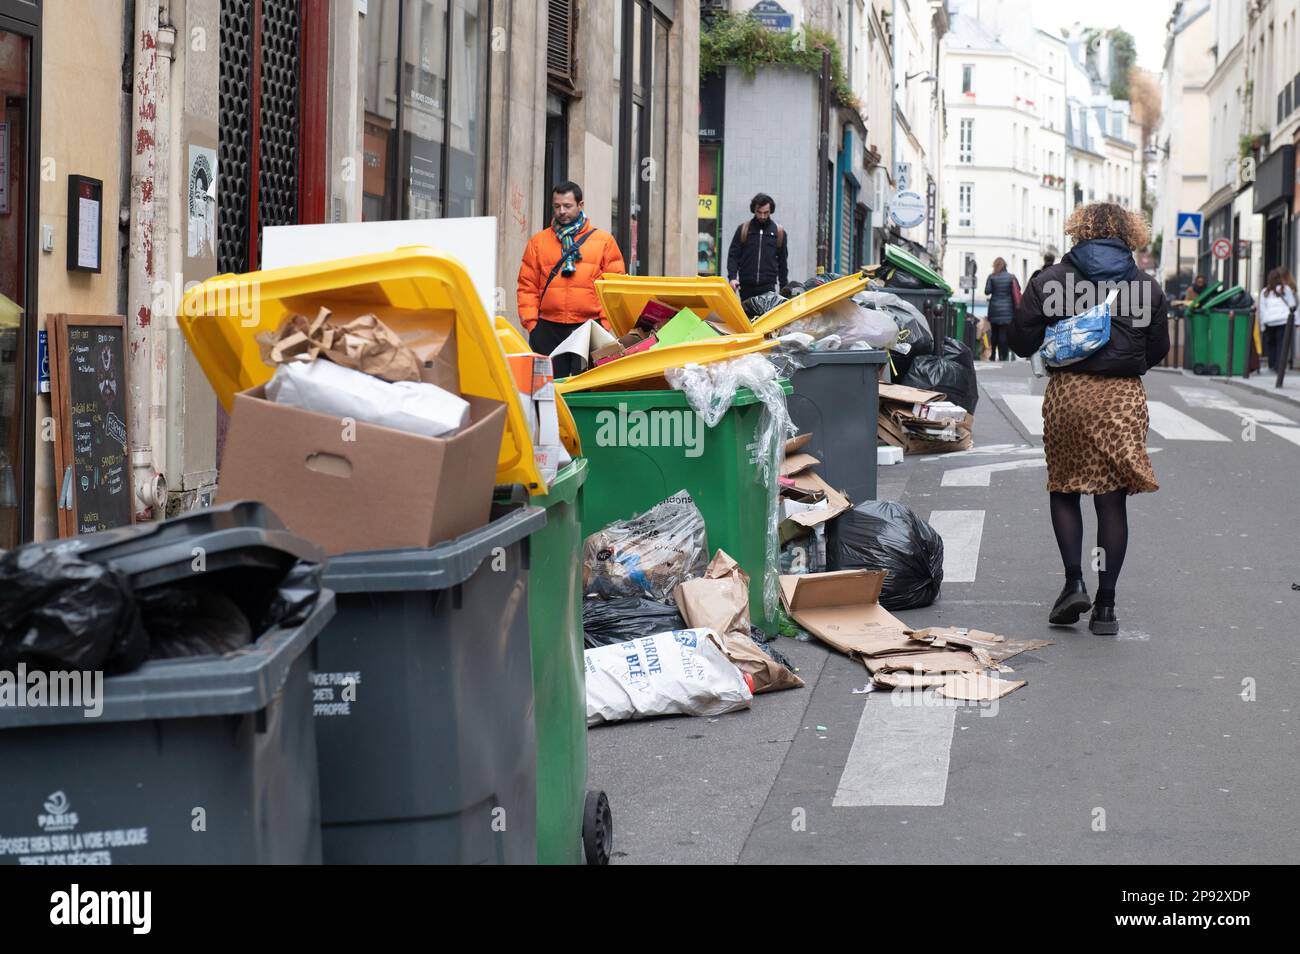 https://c8.alamy.com/comp/2P92XDP/on-march-10-2023-in-the-2nd-district-of-paris-trash-cans-and-rubbish-pile-up-on-the-sidewalks-following-a-garbage-collectors-strike-in-protest-against-the-governments-pension-reform-project-photo-by-quentin-veuilletabacapresscom-credit-abaca-pressalamy-live-news-2P92XDP.jpg